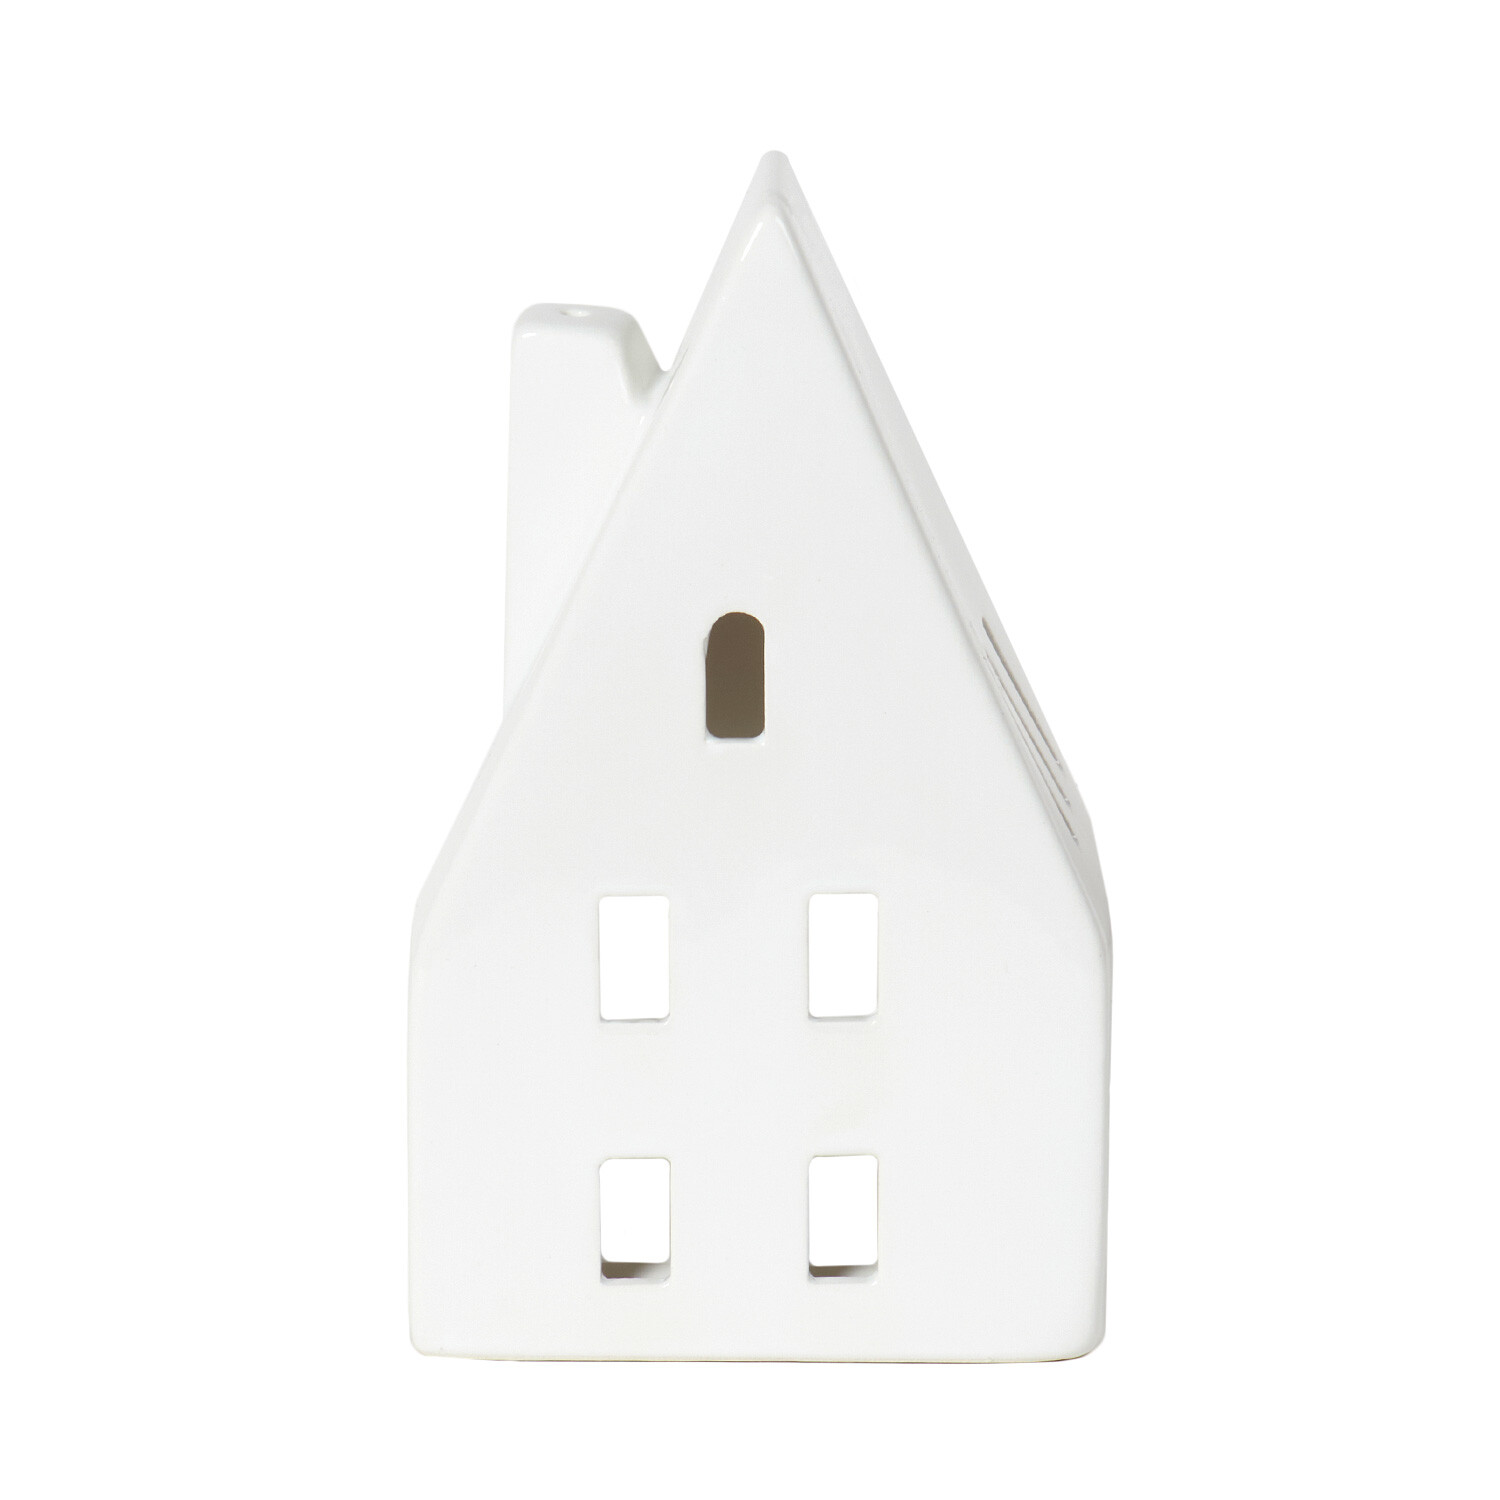 Nordic House Candle Holder Image 6